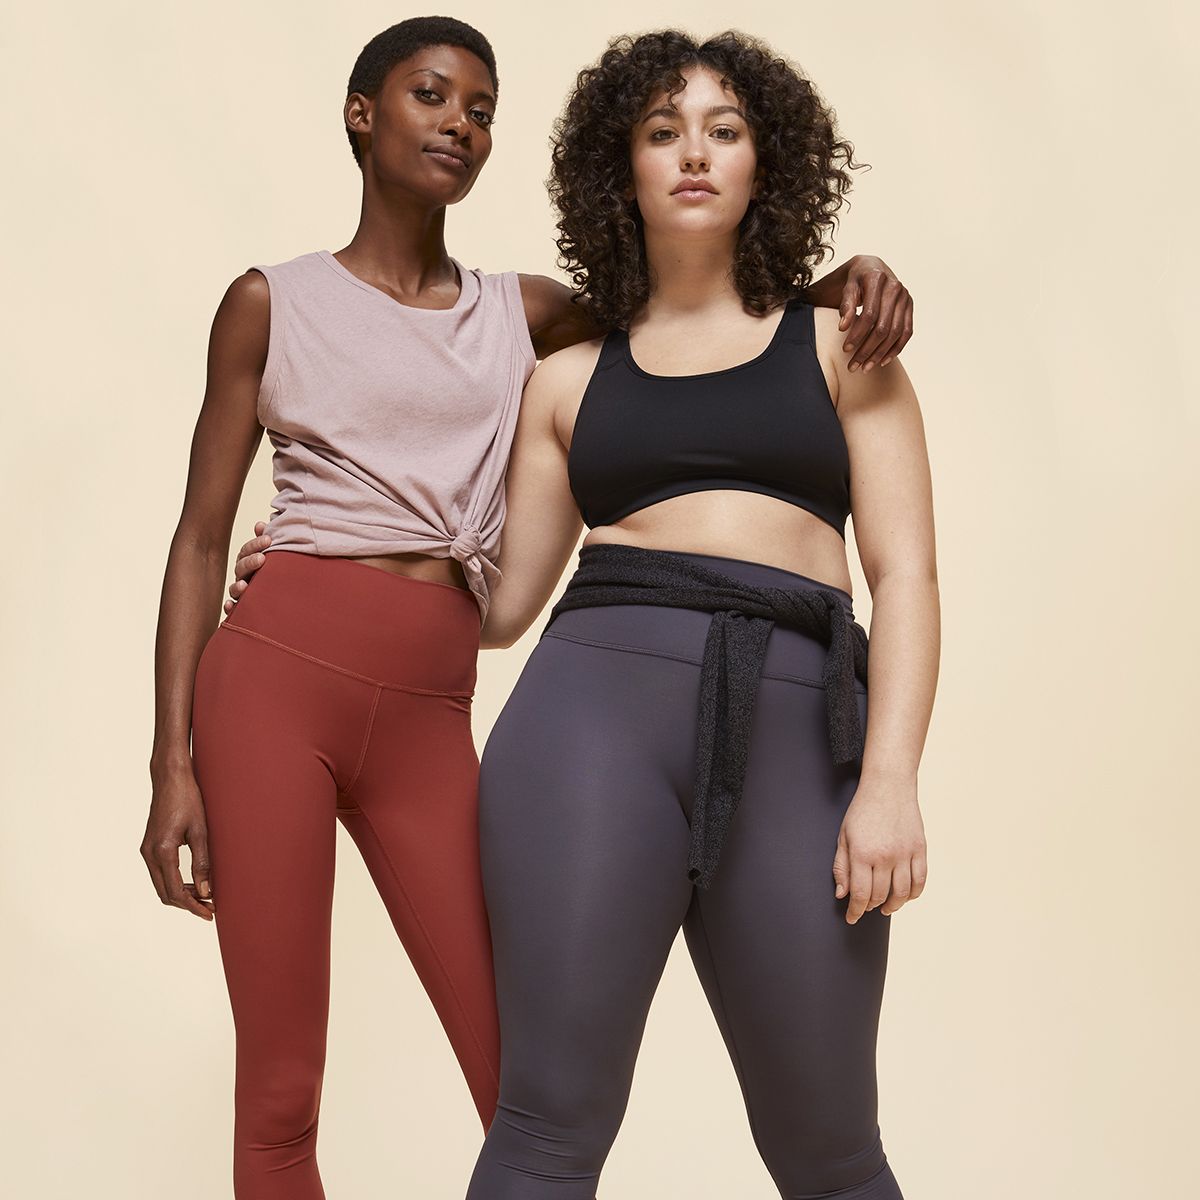 I Tried Everlane's First-Ever Leggings—Here's My Review